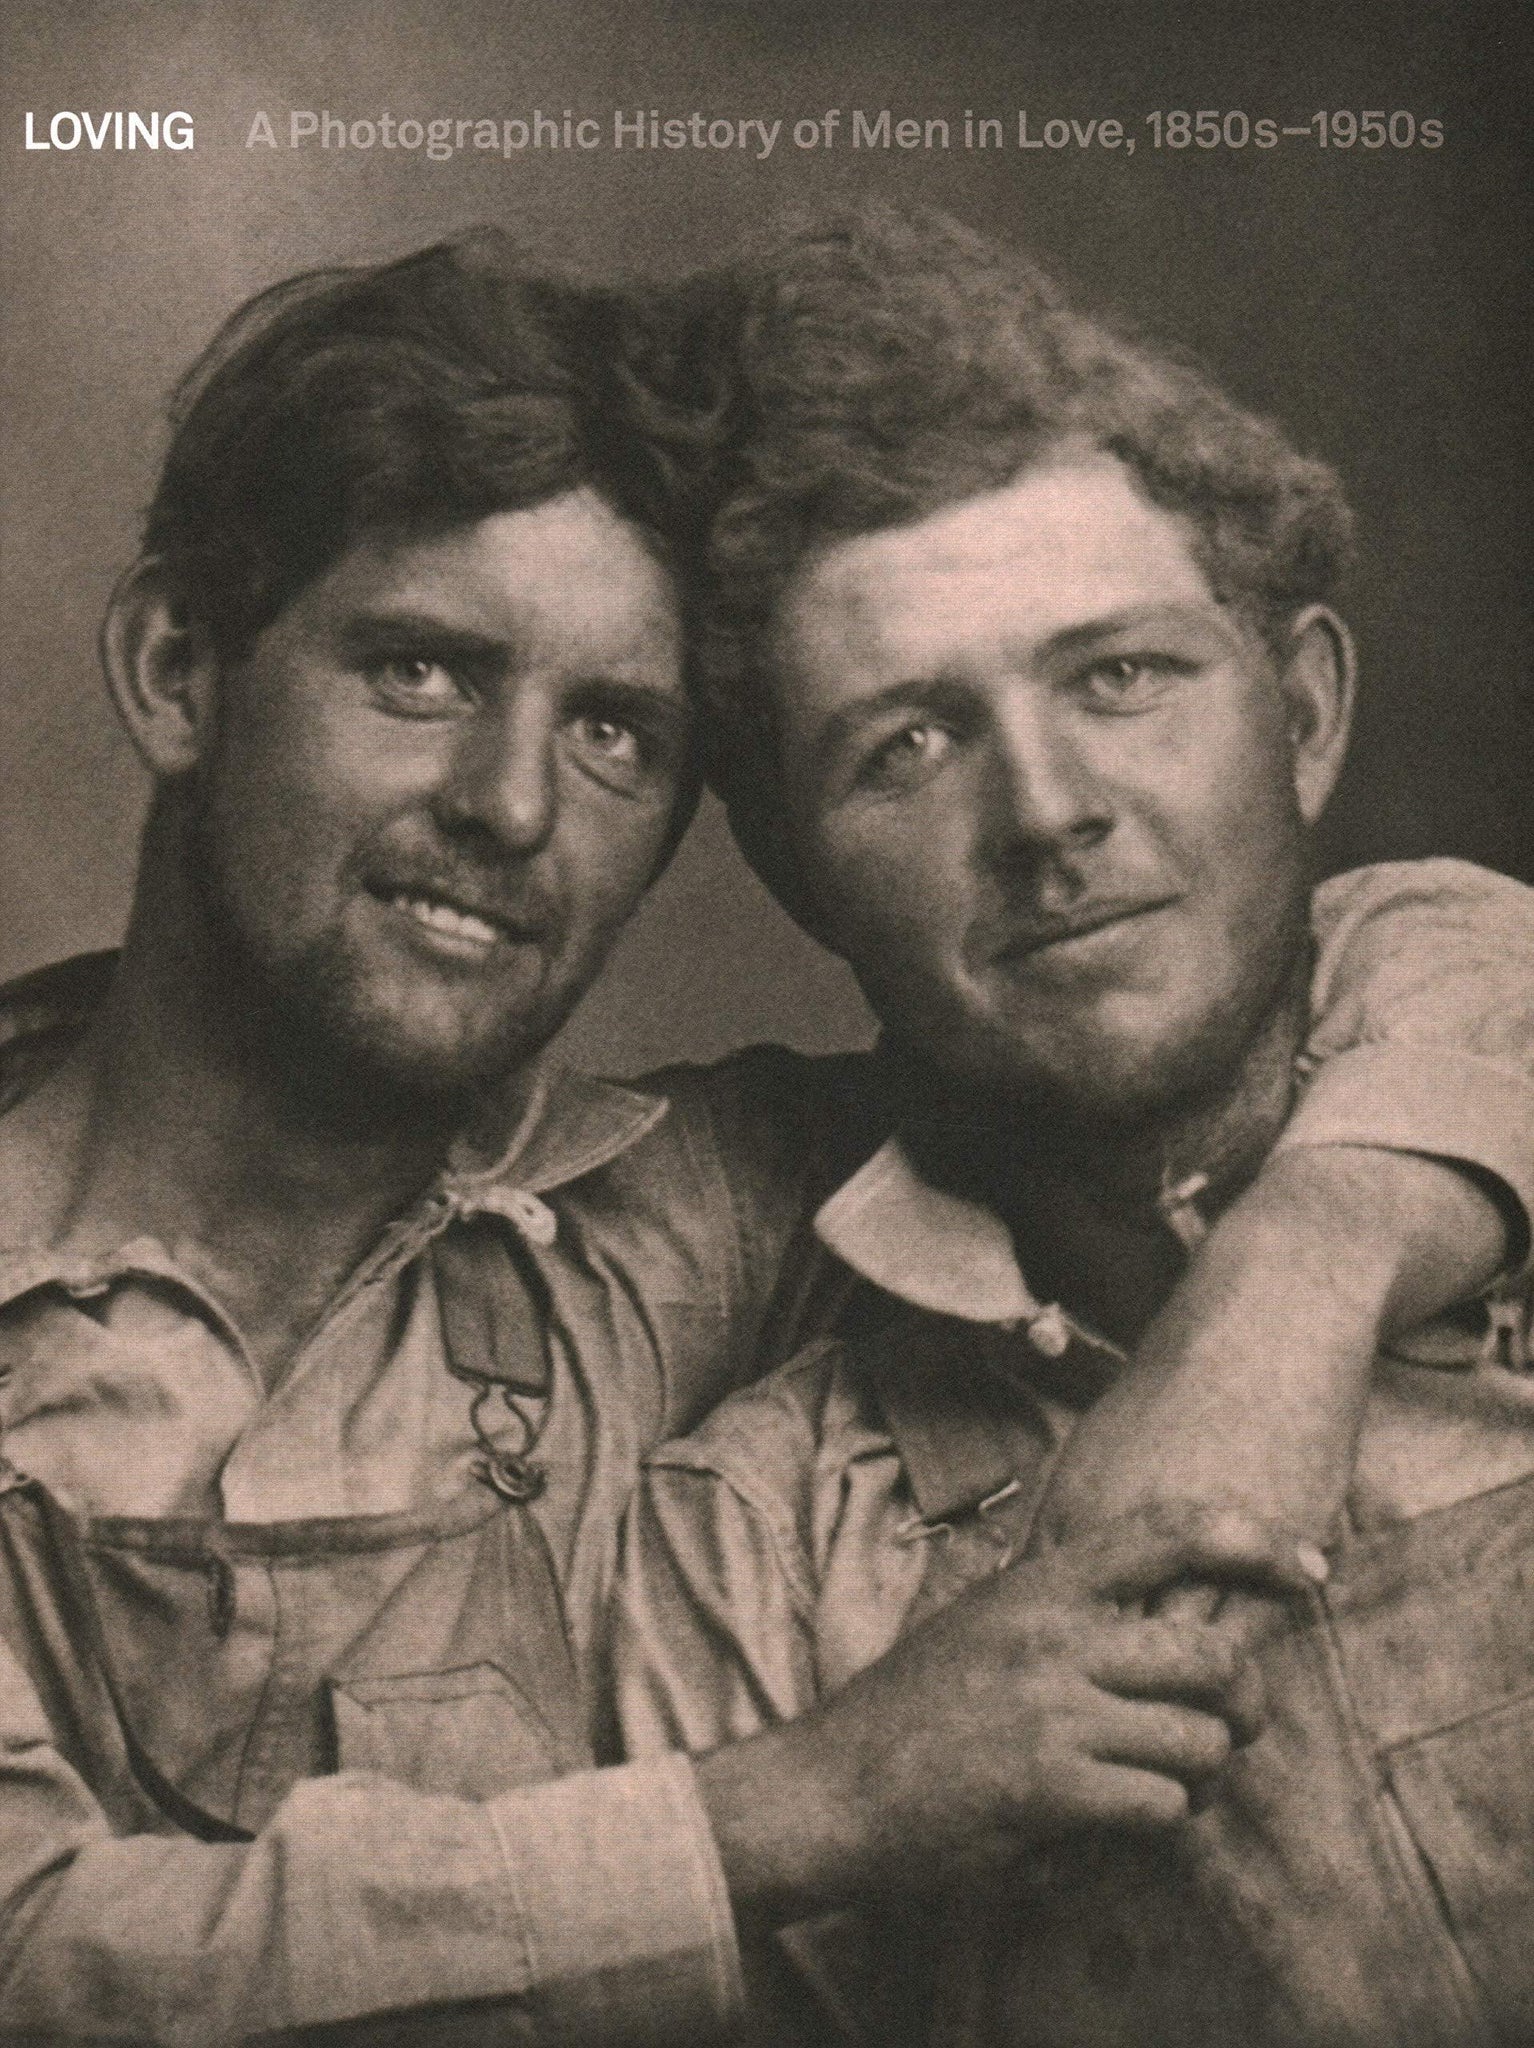 Loving: A Photographic History of Men in Love 1850s-1950s - ShopQueer.co